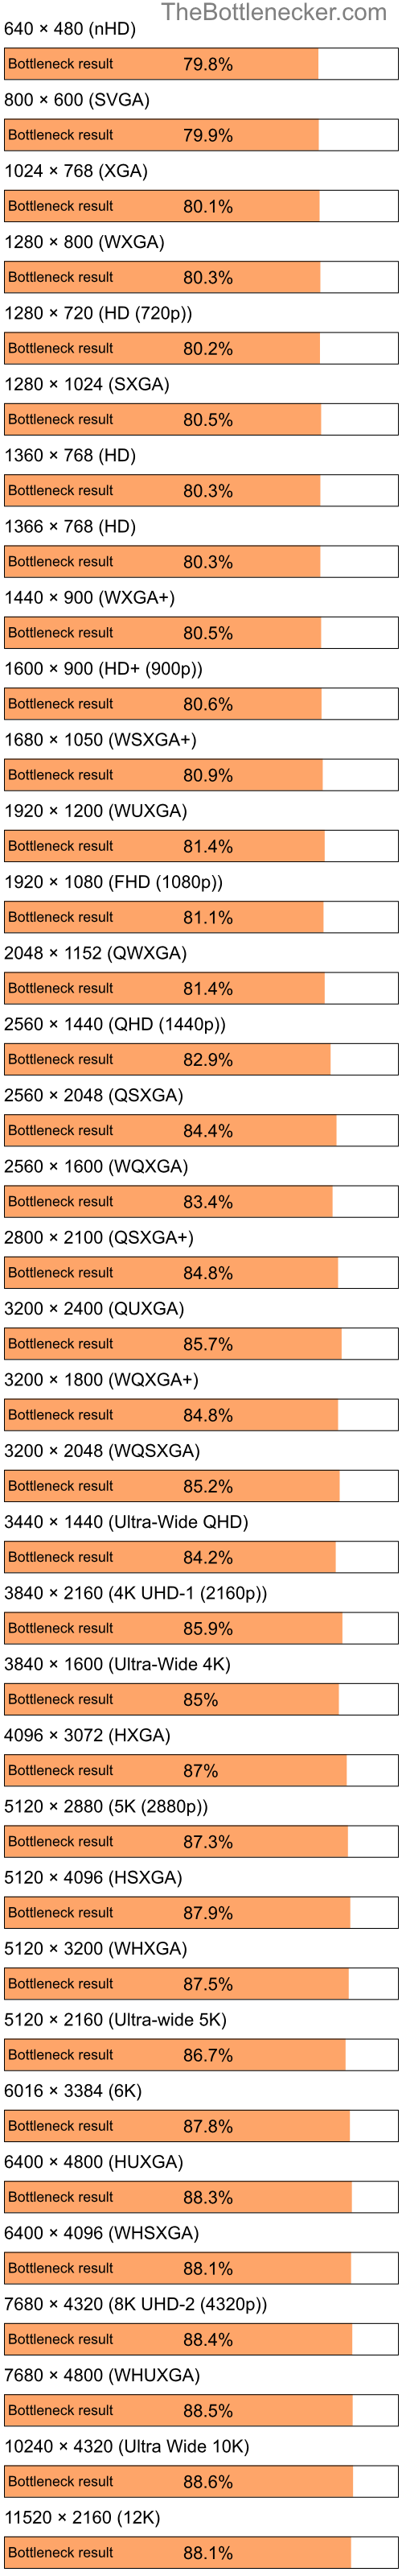 Bottleneck results by resolution for Intel Celeron M 410 and NVIDIA GeForce FX 5900XT in Graphic Card Intense Tasks